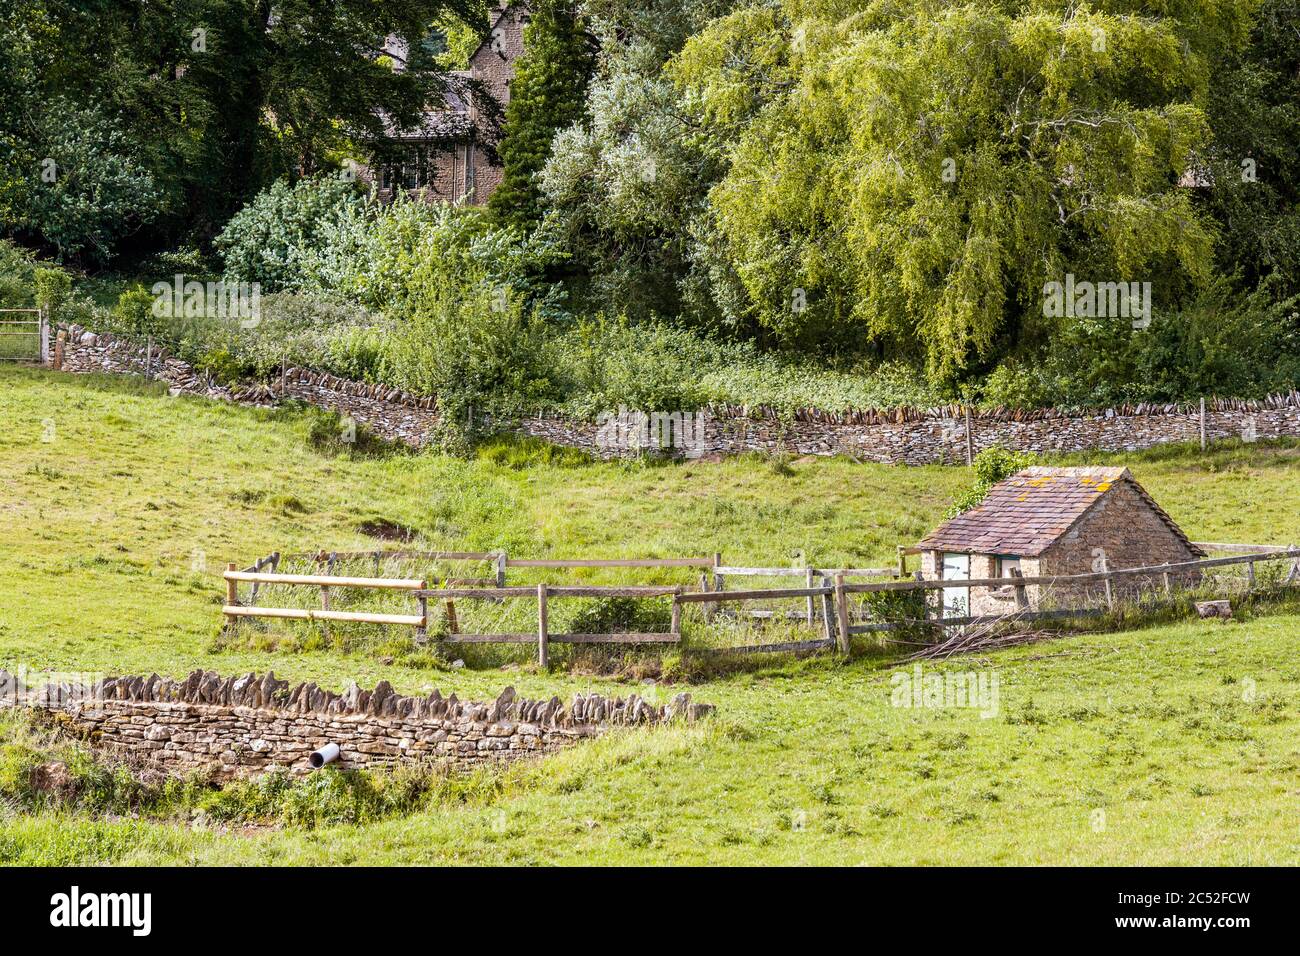 A pump house on the spring line to supply water to Snowshill Hill near the Cotswold village of Snowshill, Gloucestershire UK Stock Photo